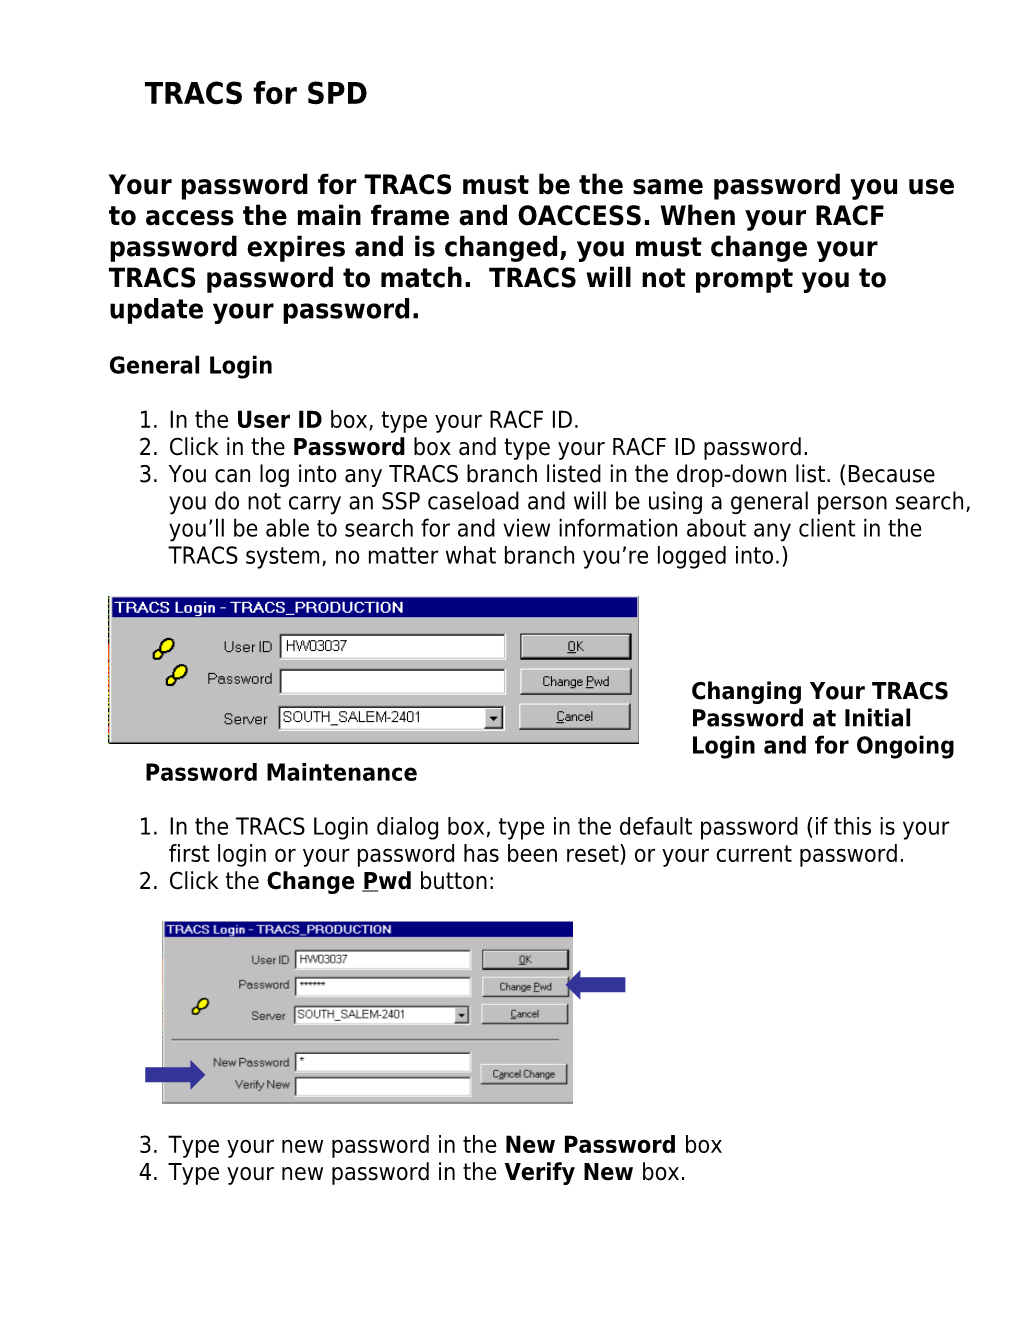 Your Password for TRACS Must Be the Same Password You Use to Access the Main Frame And